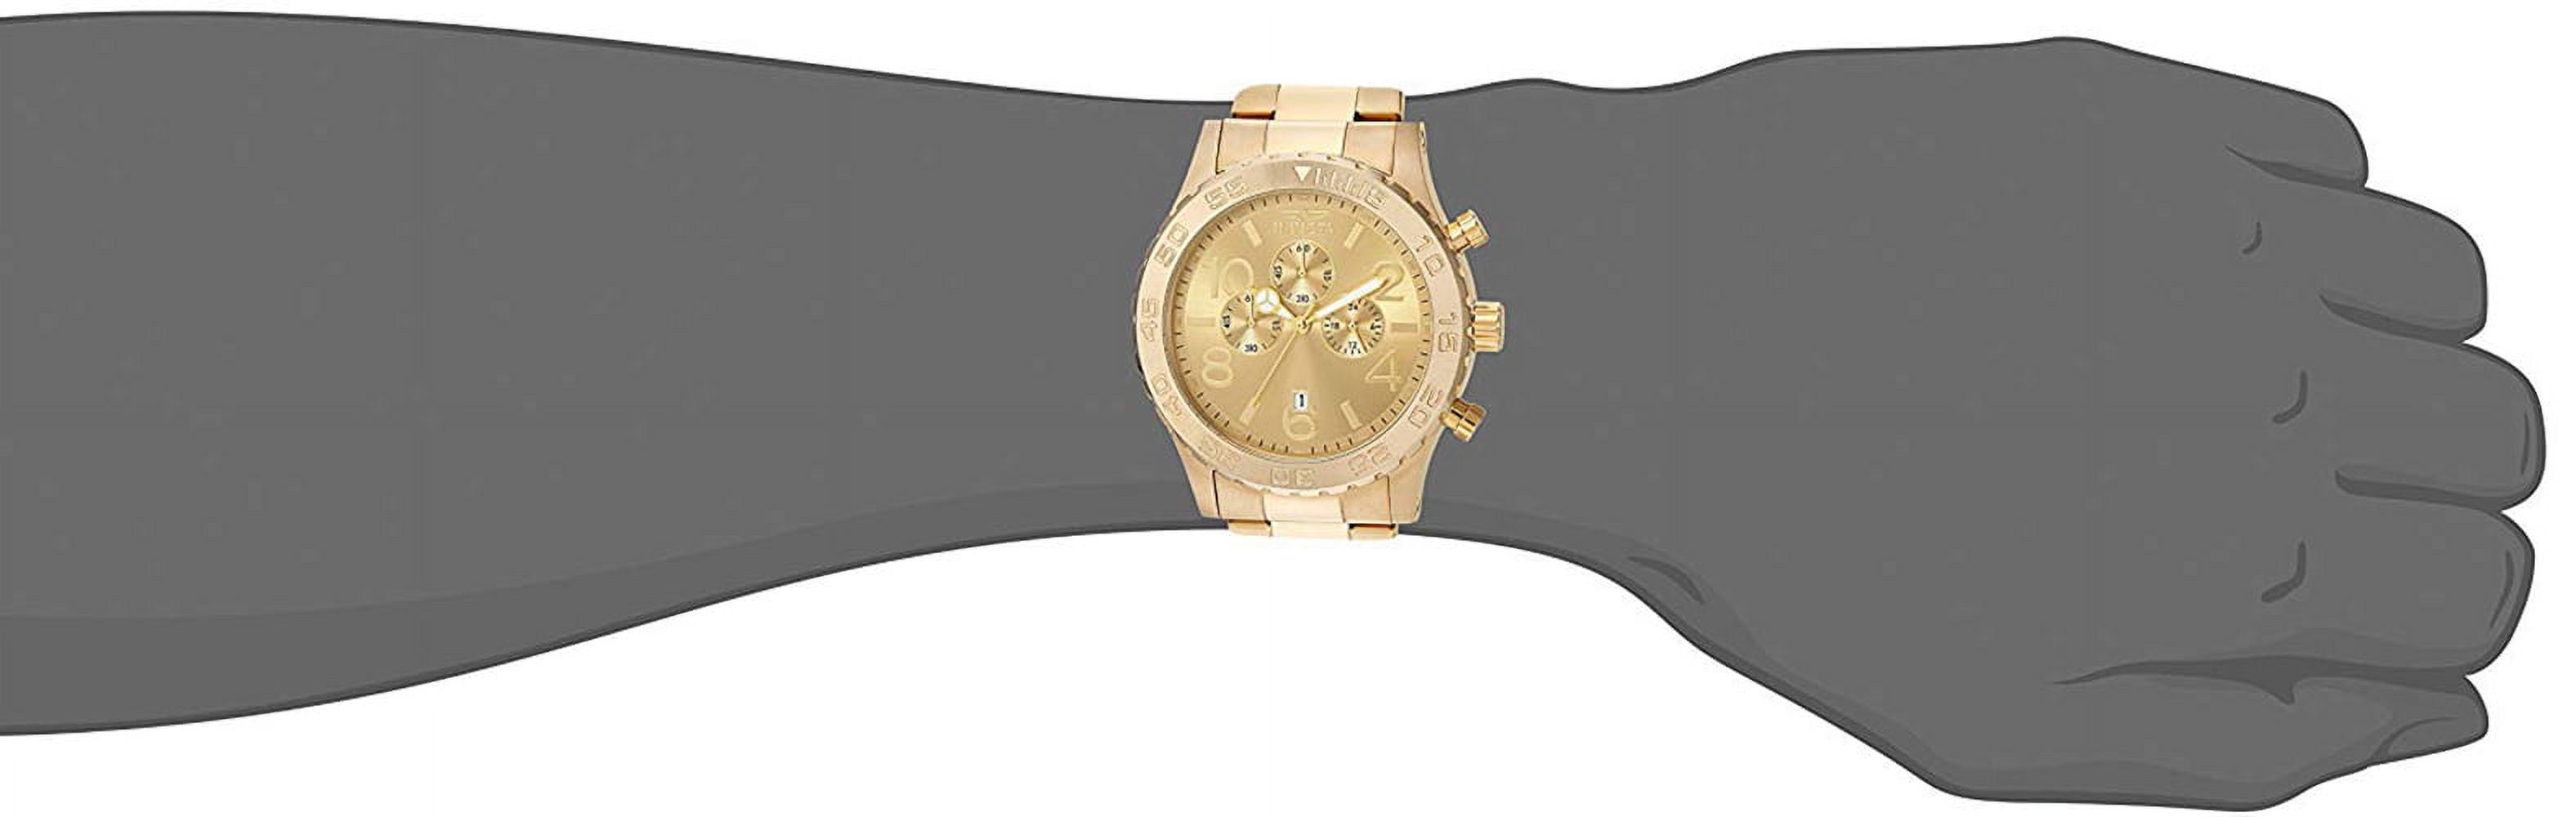 Invicta Men's 1270 Specialty Chronograph Gold Dial 18k Gold Ion-Plated  Stainless Steel Watch